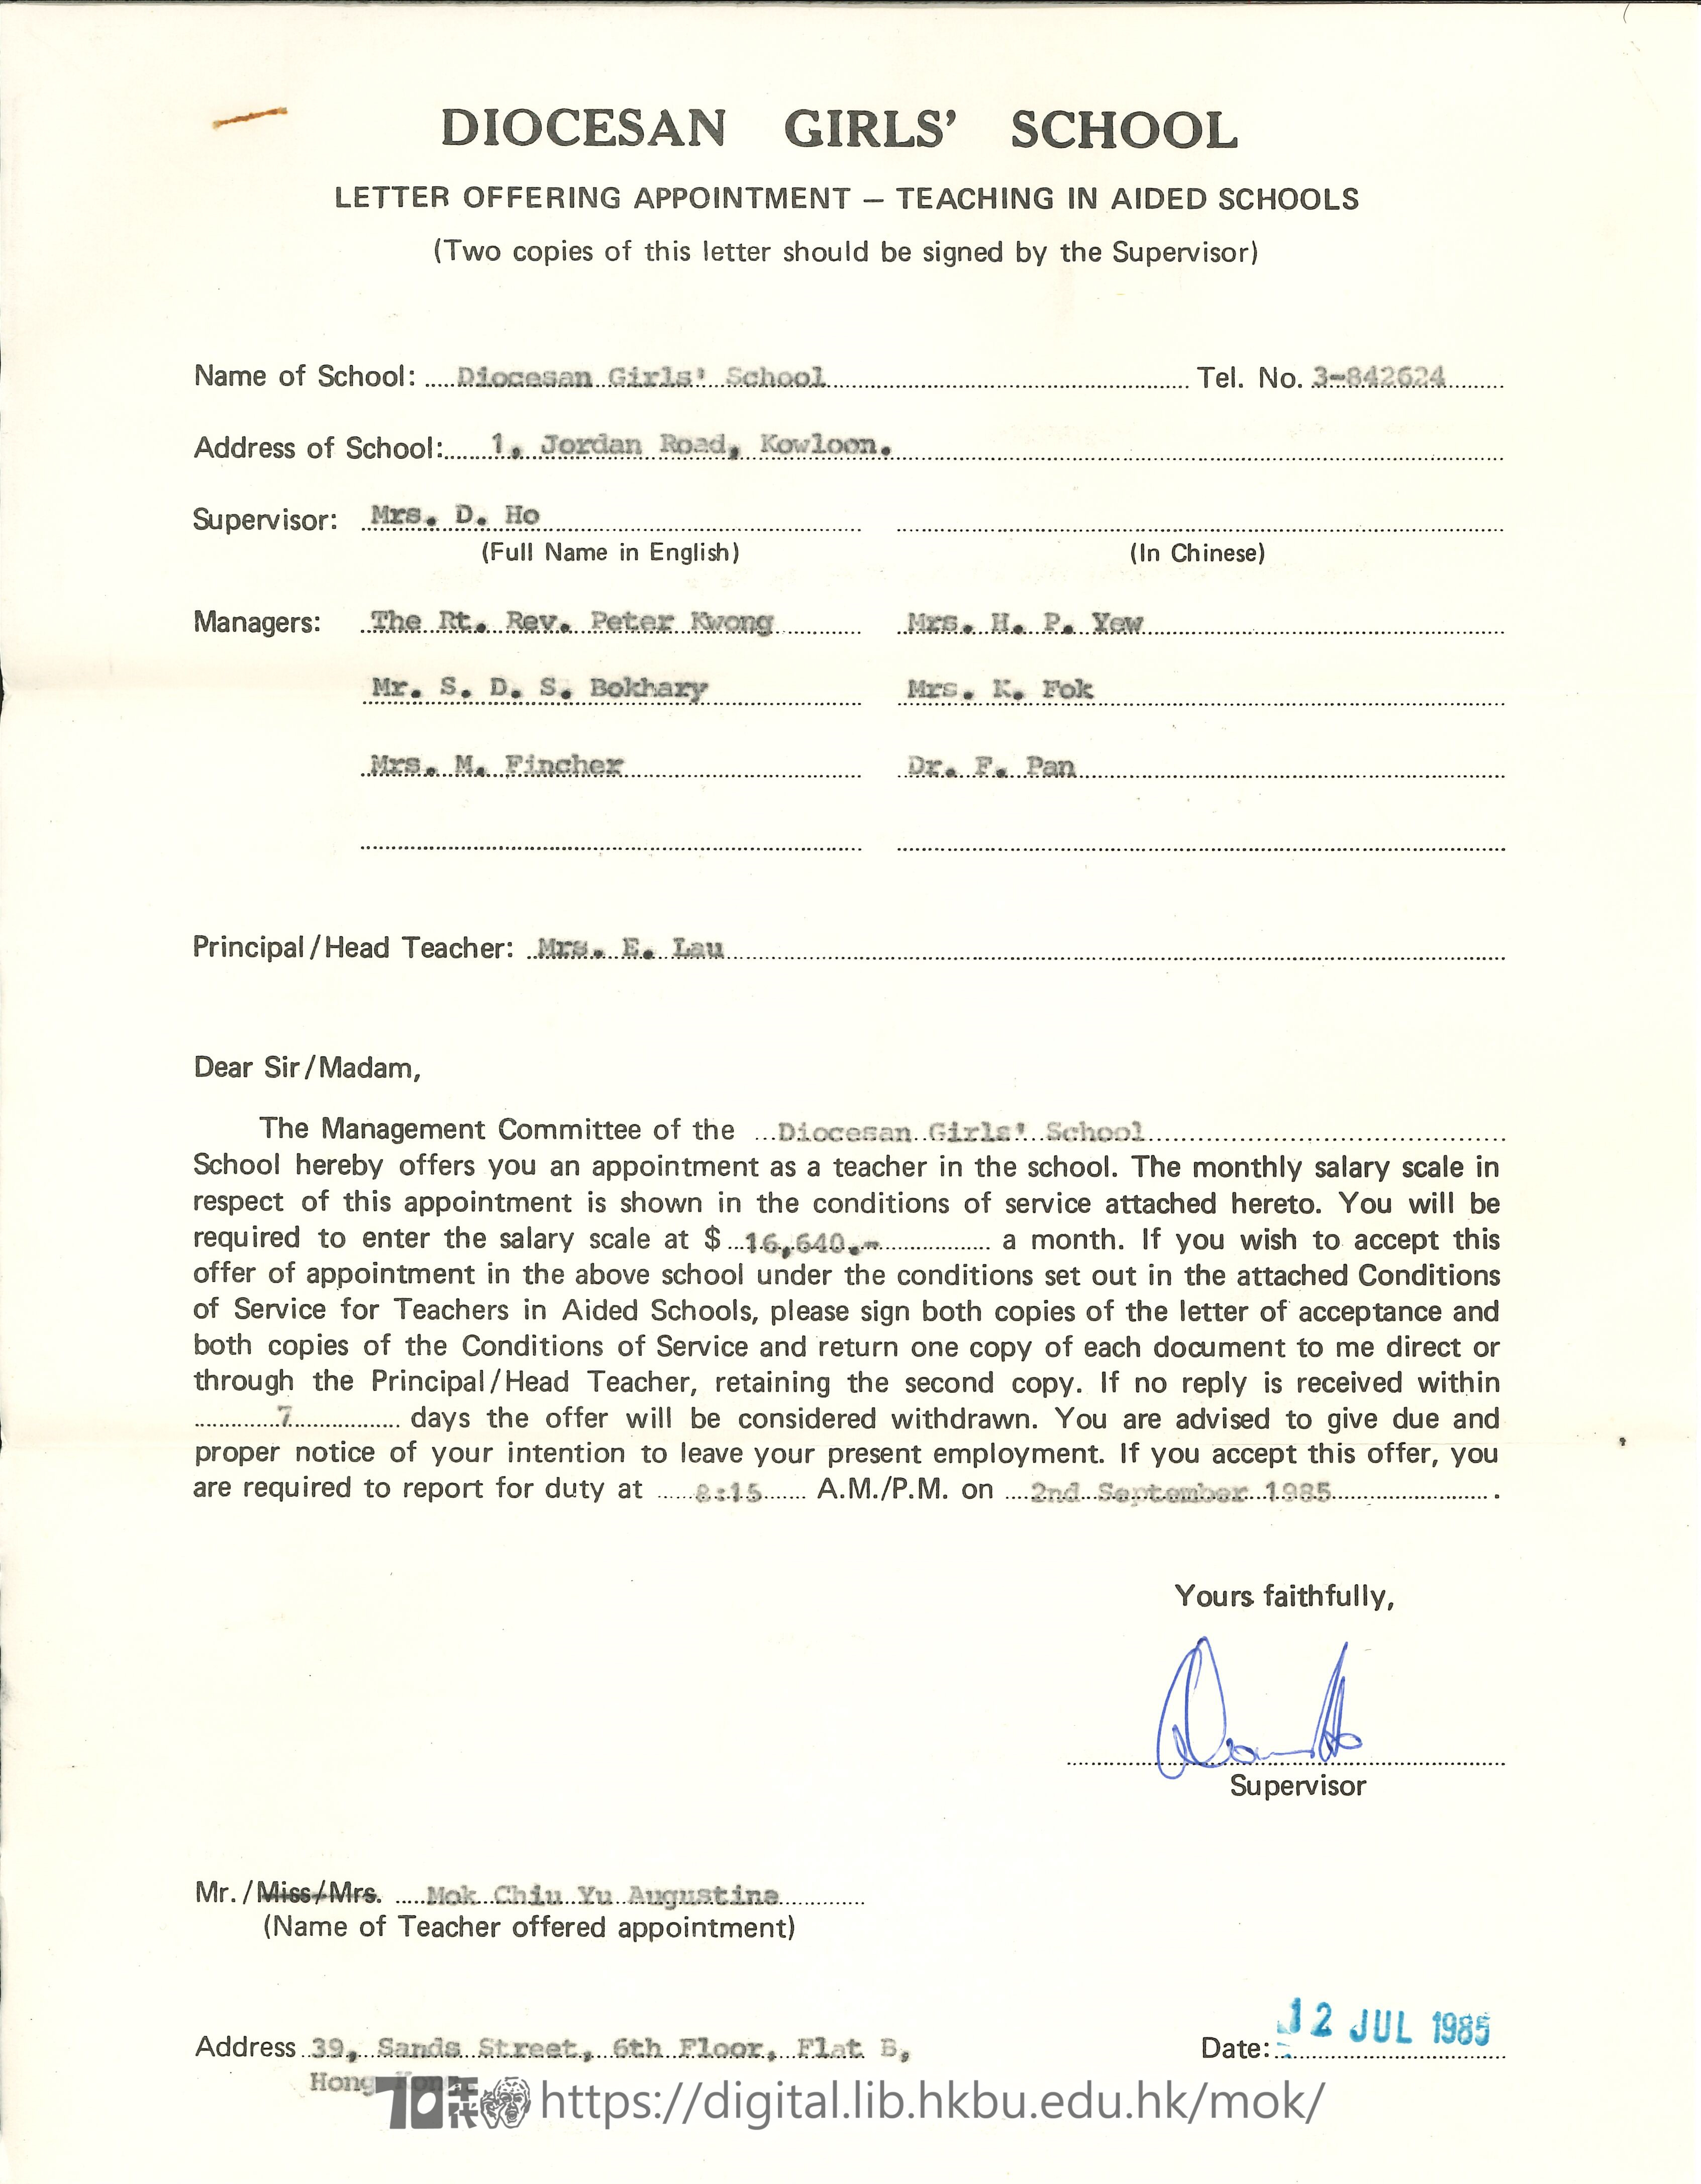   Appointment letter form Diocesan Girl